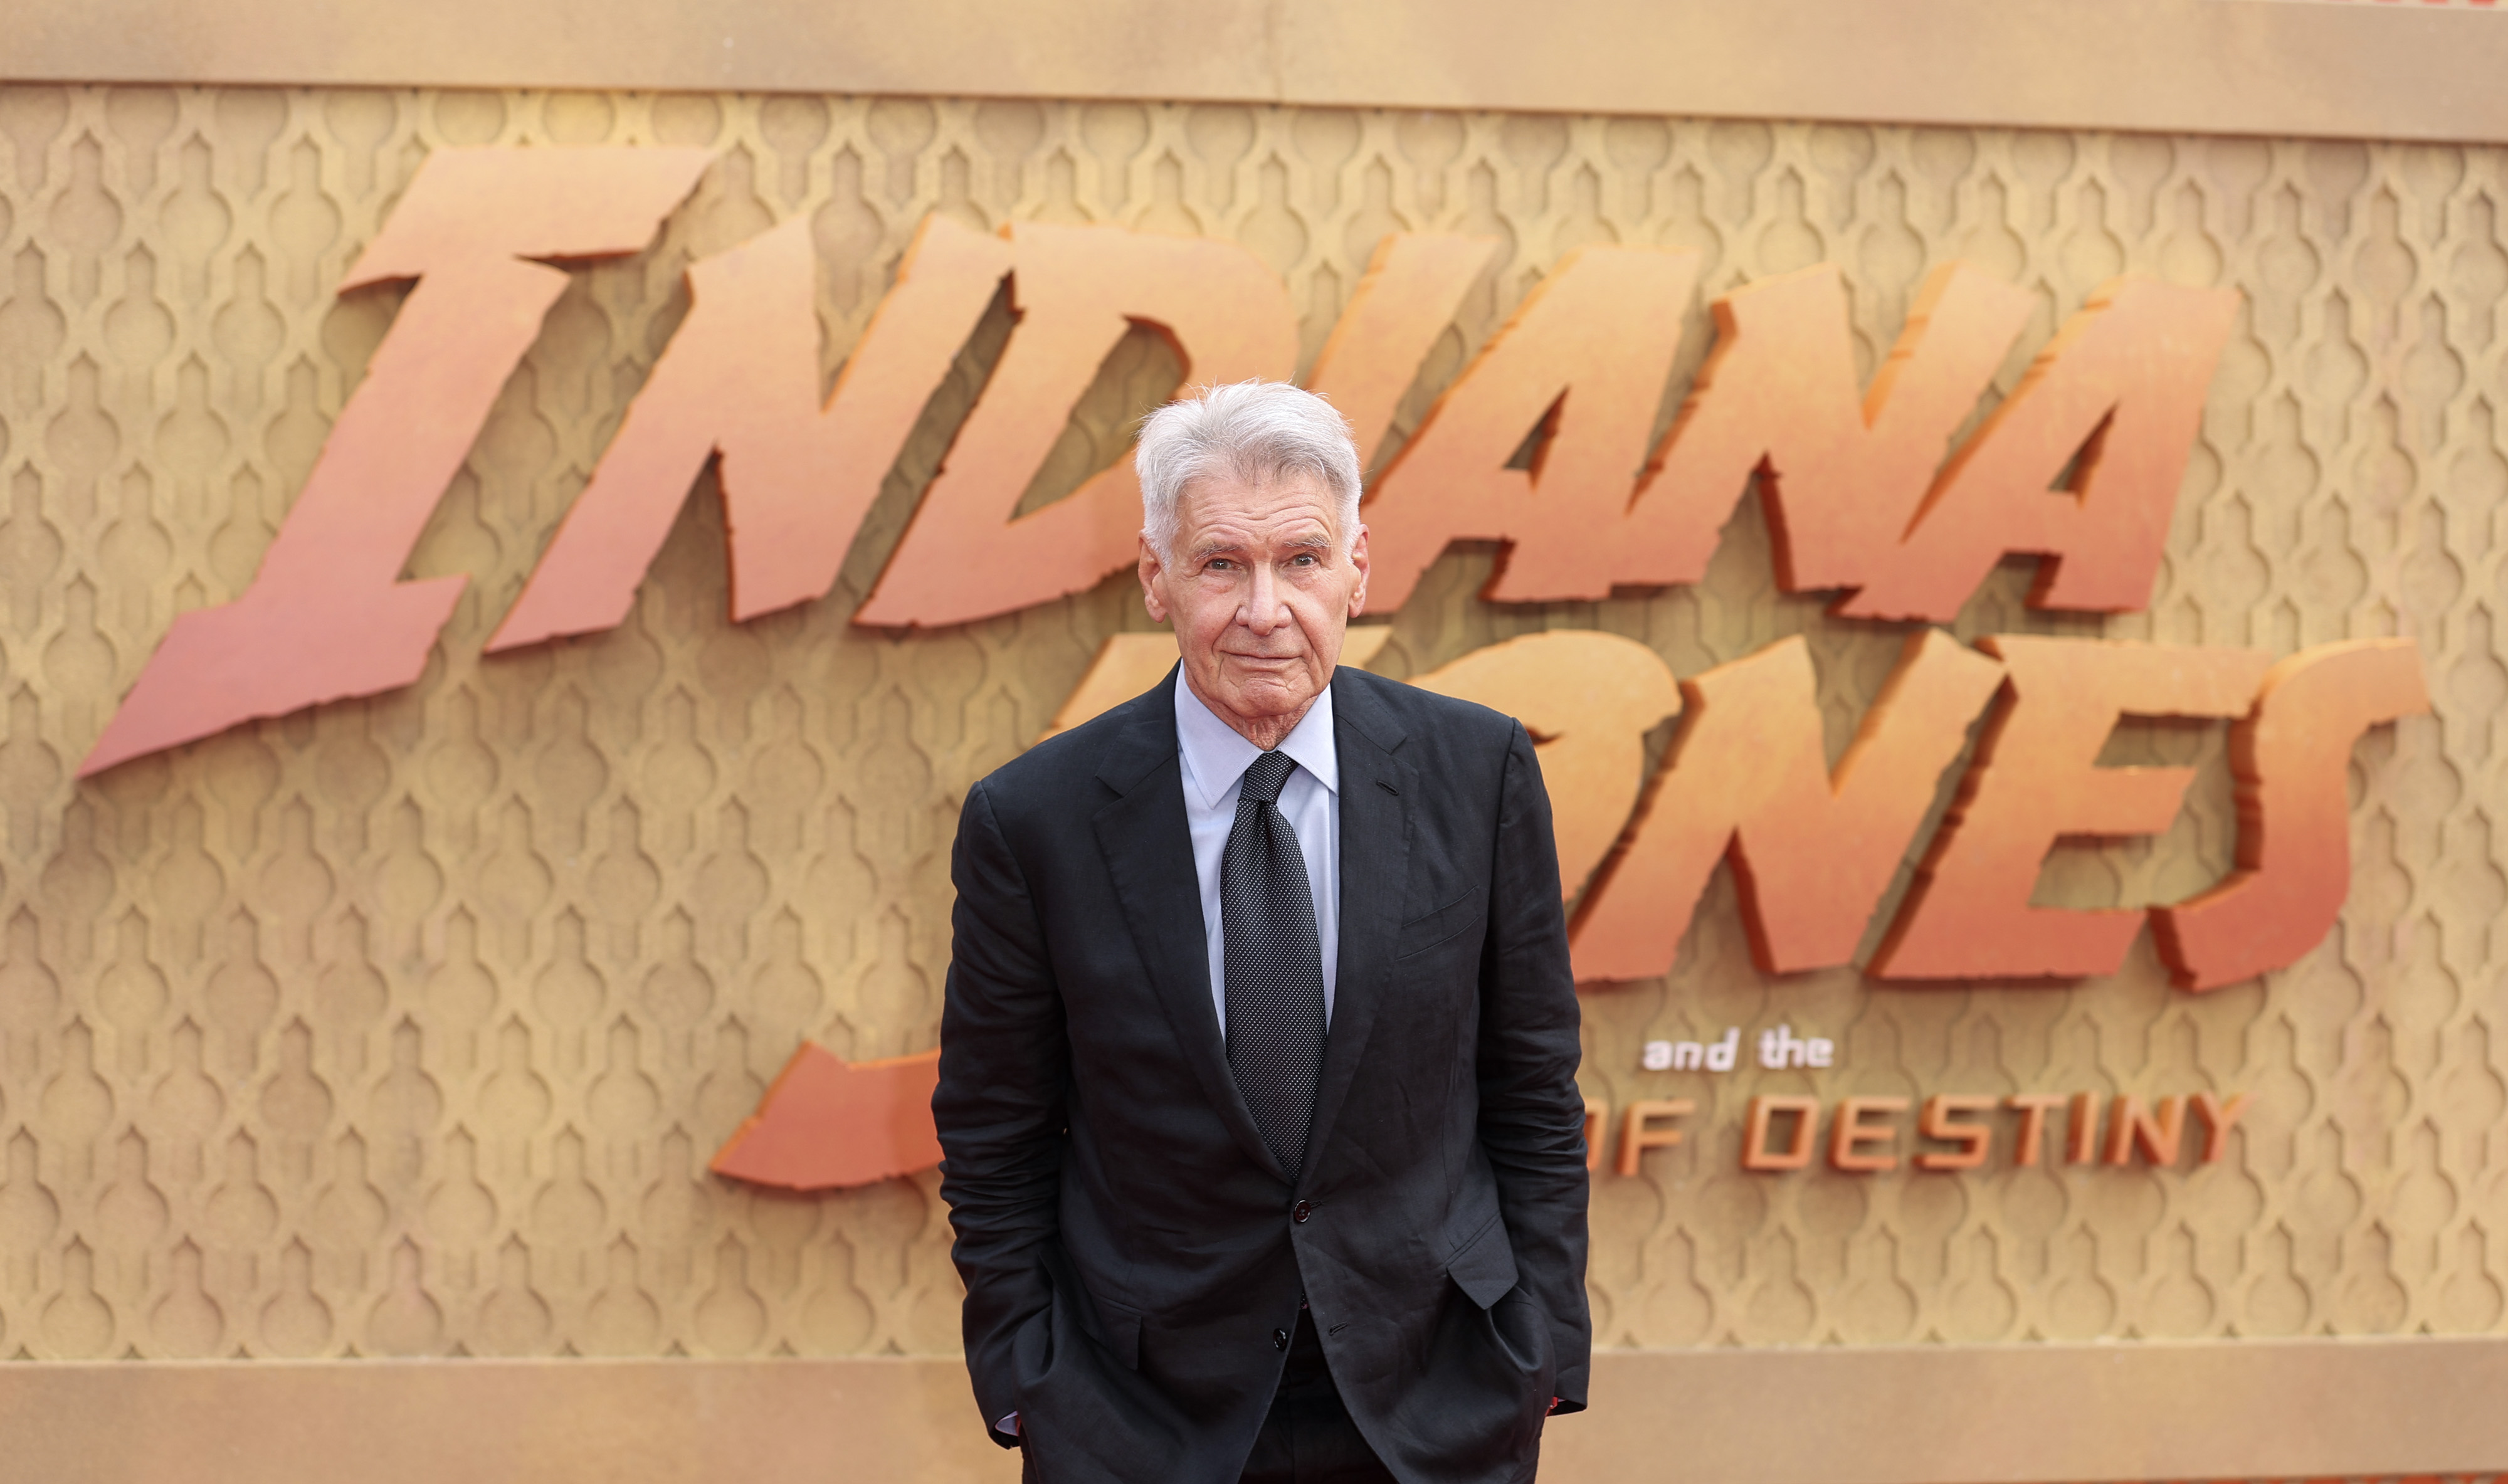 Harrison Ford at the "Indiana Jones and the Dial of Destiny" premiere in London, England on June 26, 2023 | Source: Getty Images